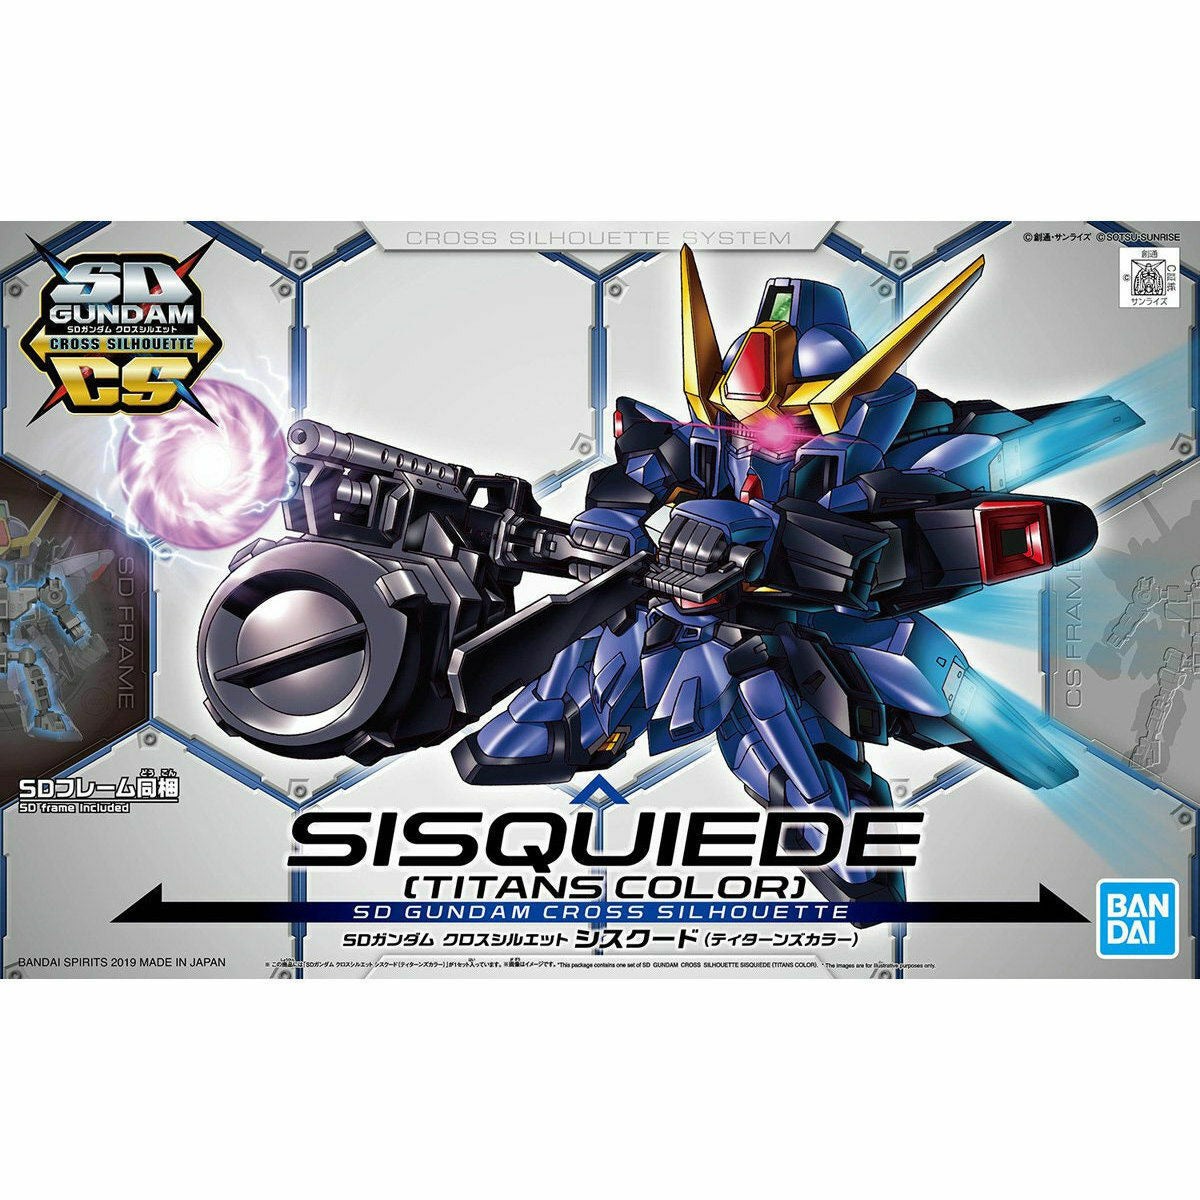 SD Cross Silhouette #10 Sisquiede (TITANS Colors) #5057010 by Bandai